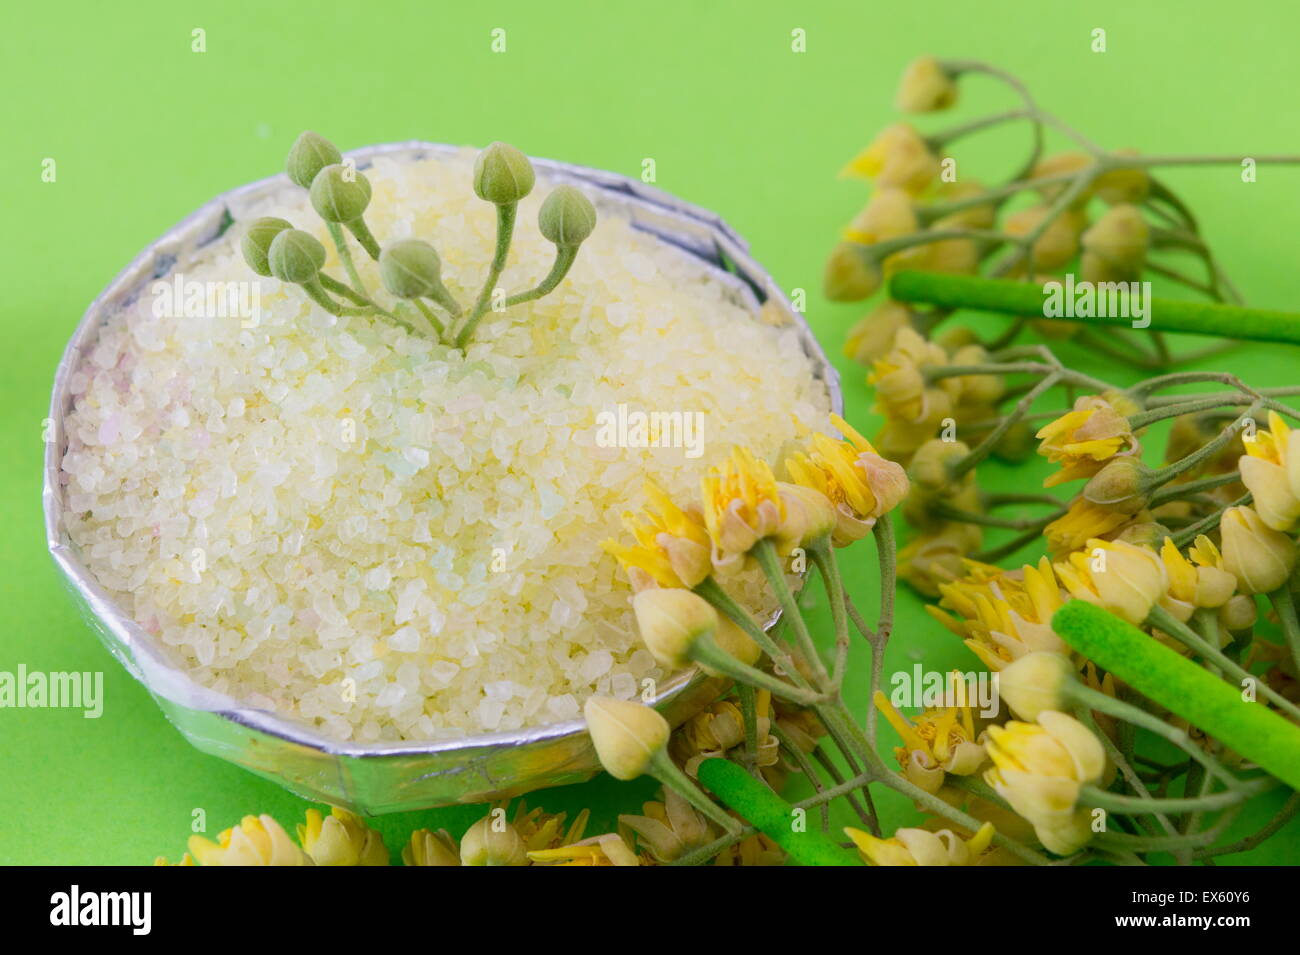 Gren bath salt decorated with linden flowers on a green backgound Stock Photo